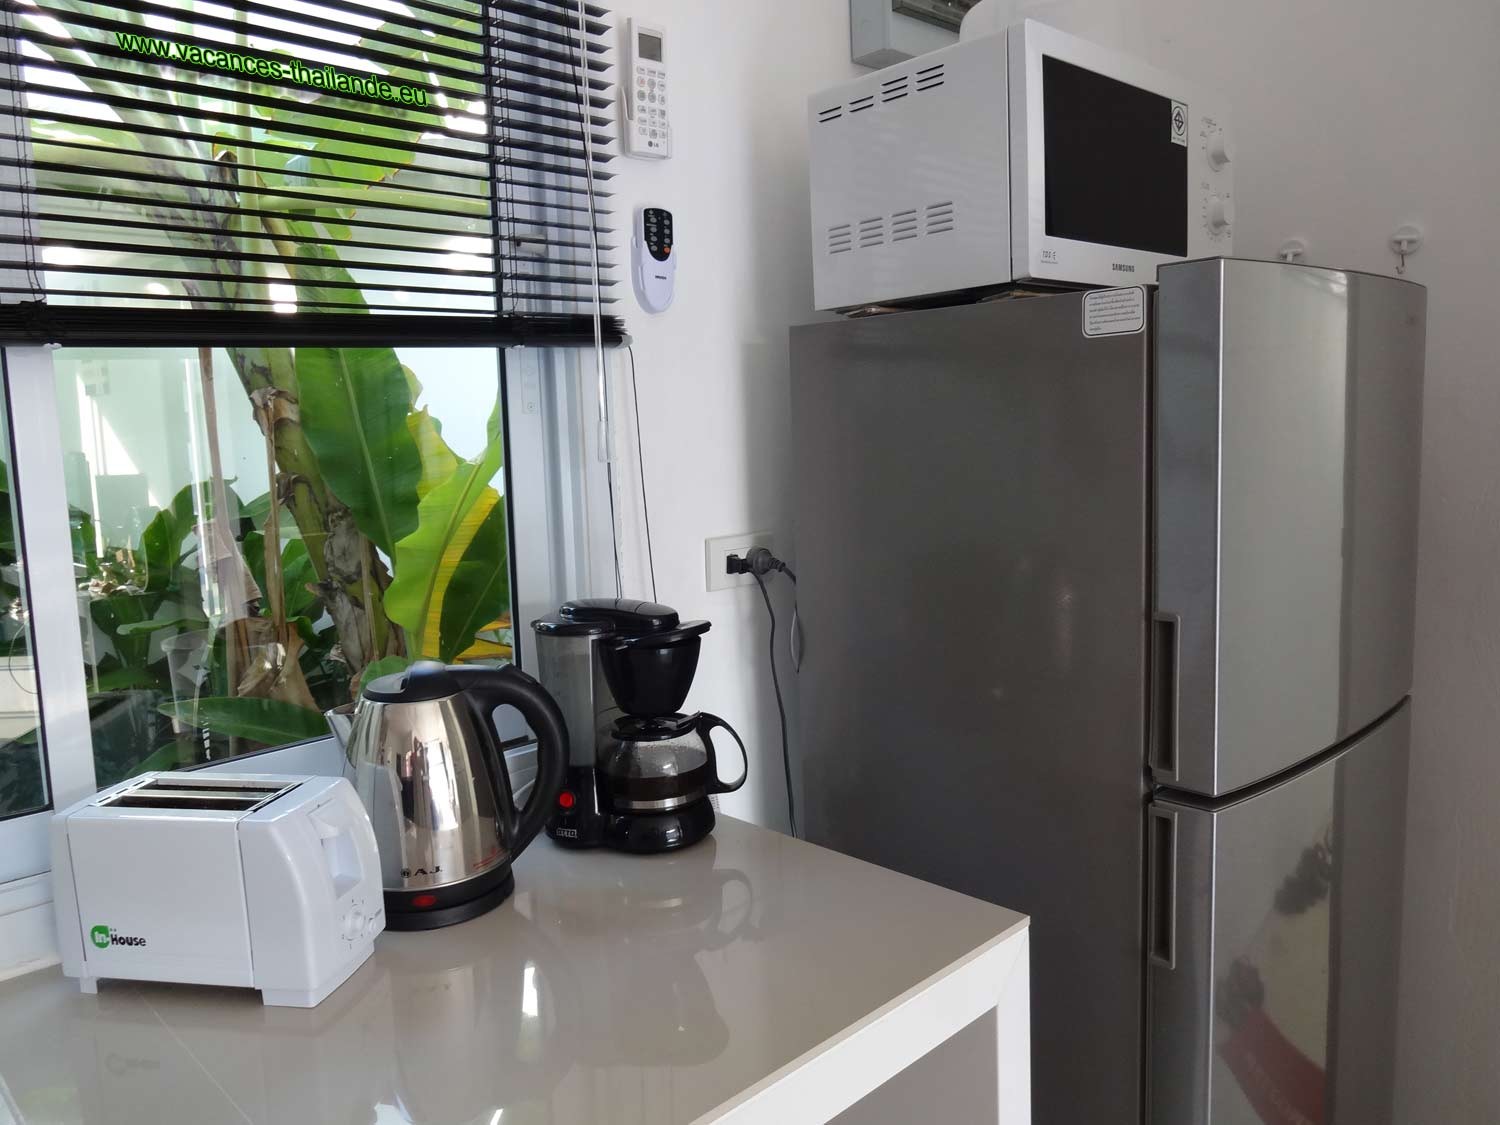 Photo 34 english center pin equipped kitchen electric stove, microwave oven and various accessory koh samui